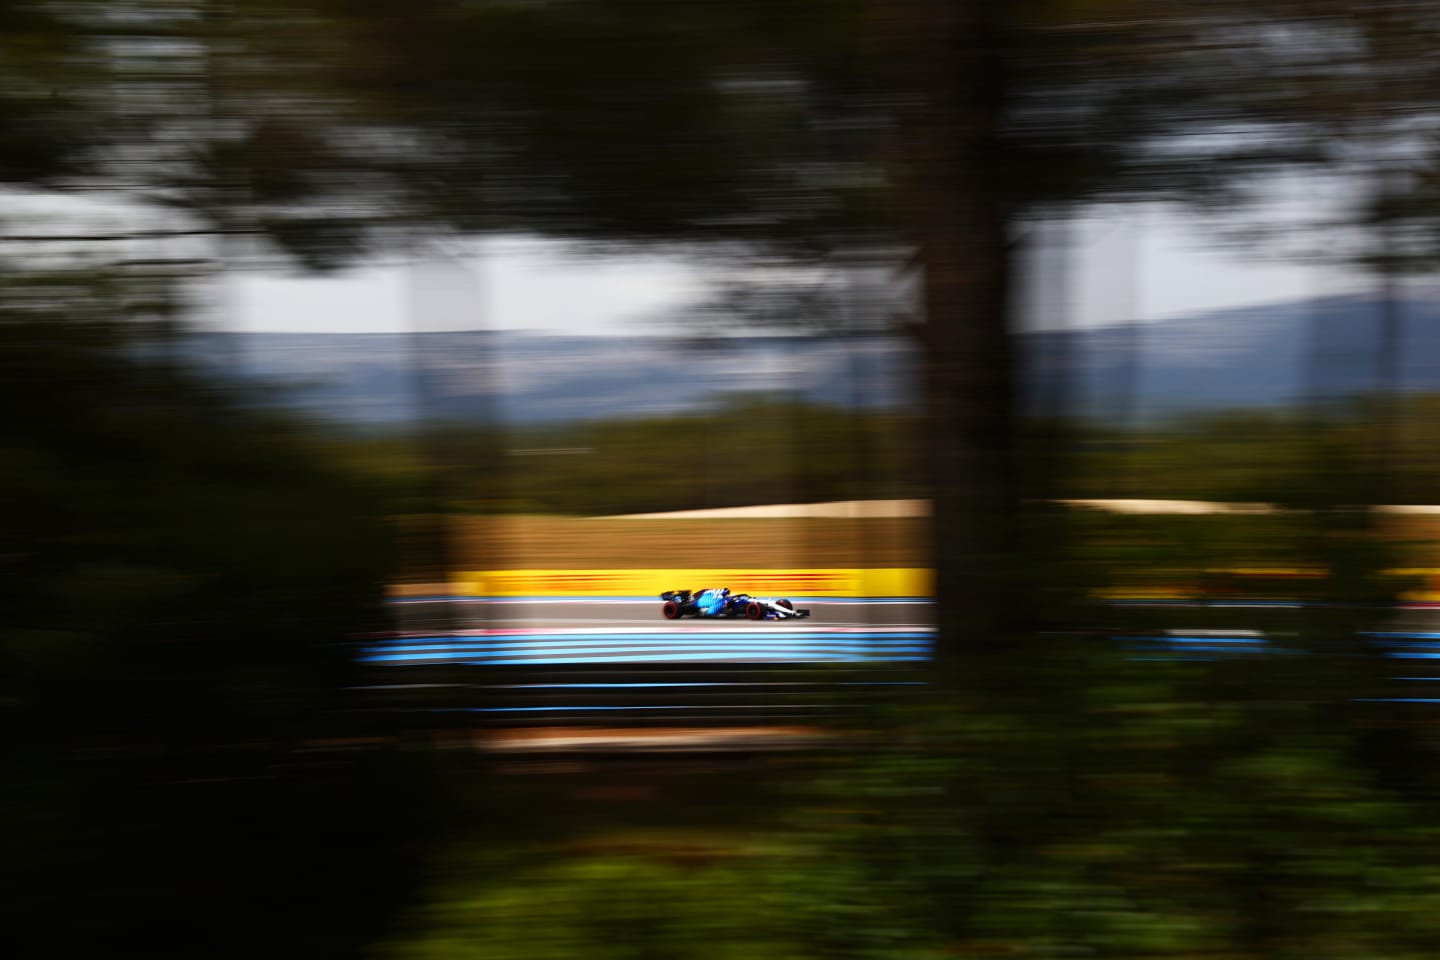 LE CASTELLET, FRANCE - JUNE 18:  Nicholas Latifi of Canada driving the (6) Williams Racing FW43B Mercedes during practice ahead of the F1 Grand Prix of France at Circuit Paul Ricard on June 18, 2021 in Le Castellet, France. (Photo by Dan Istitene - Formula 1/Formula 1 via Getty Images)